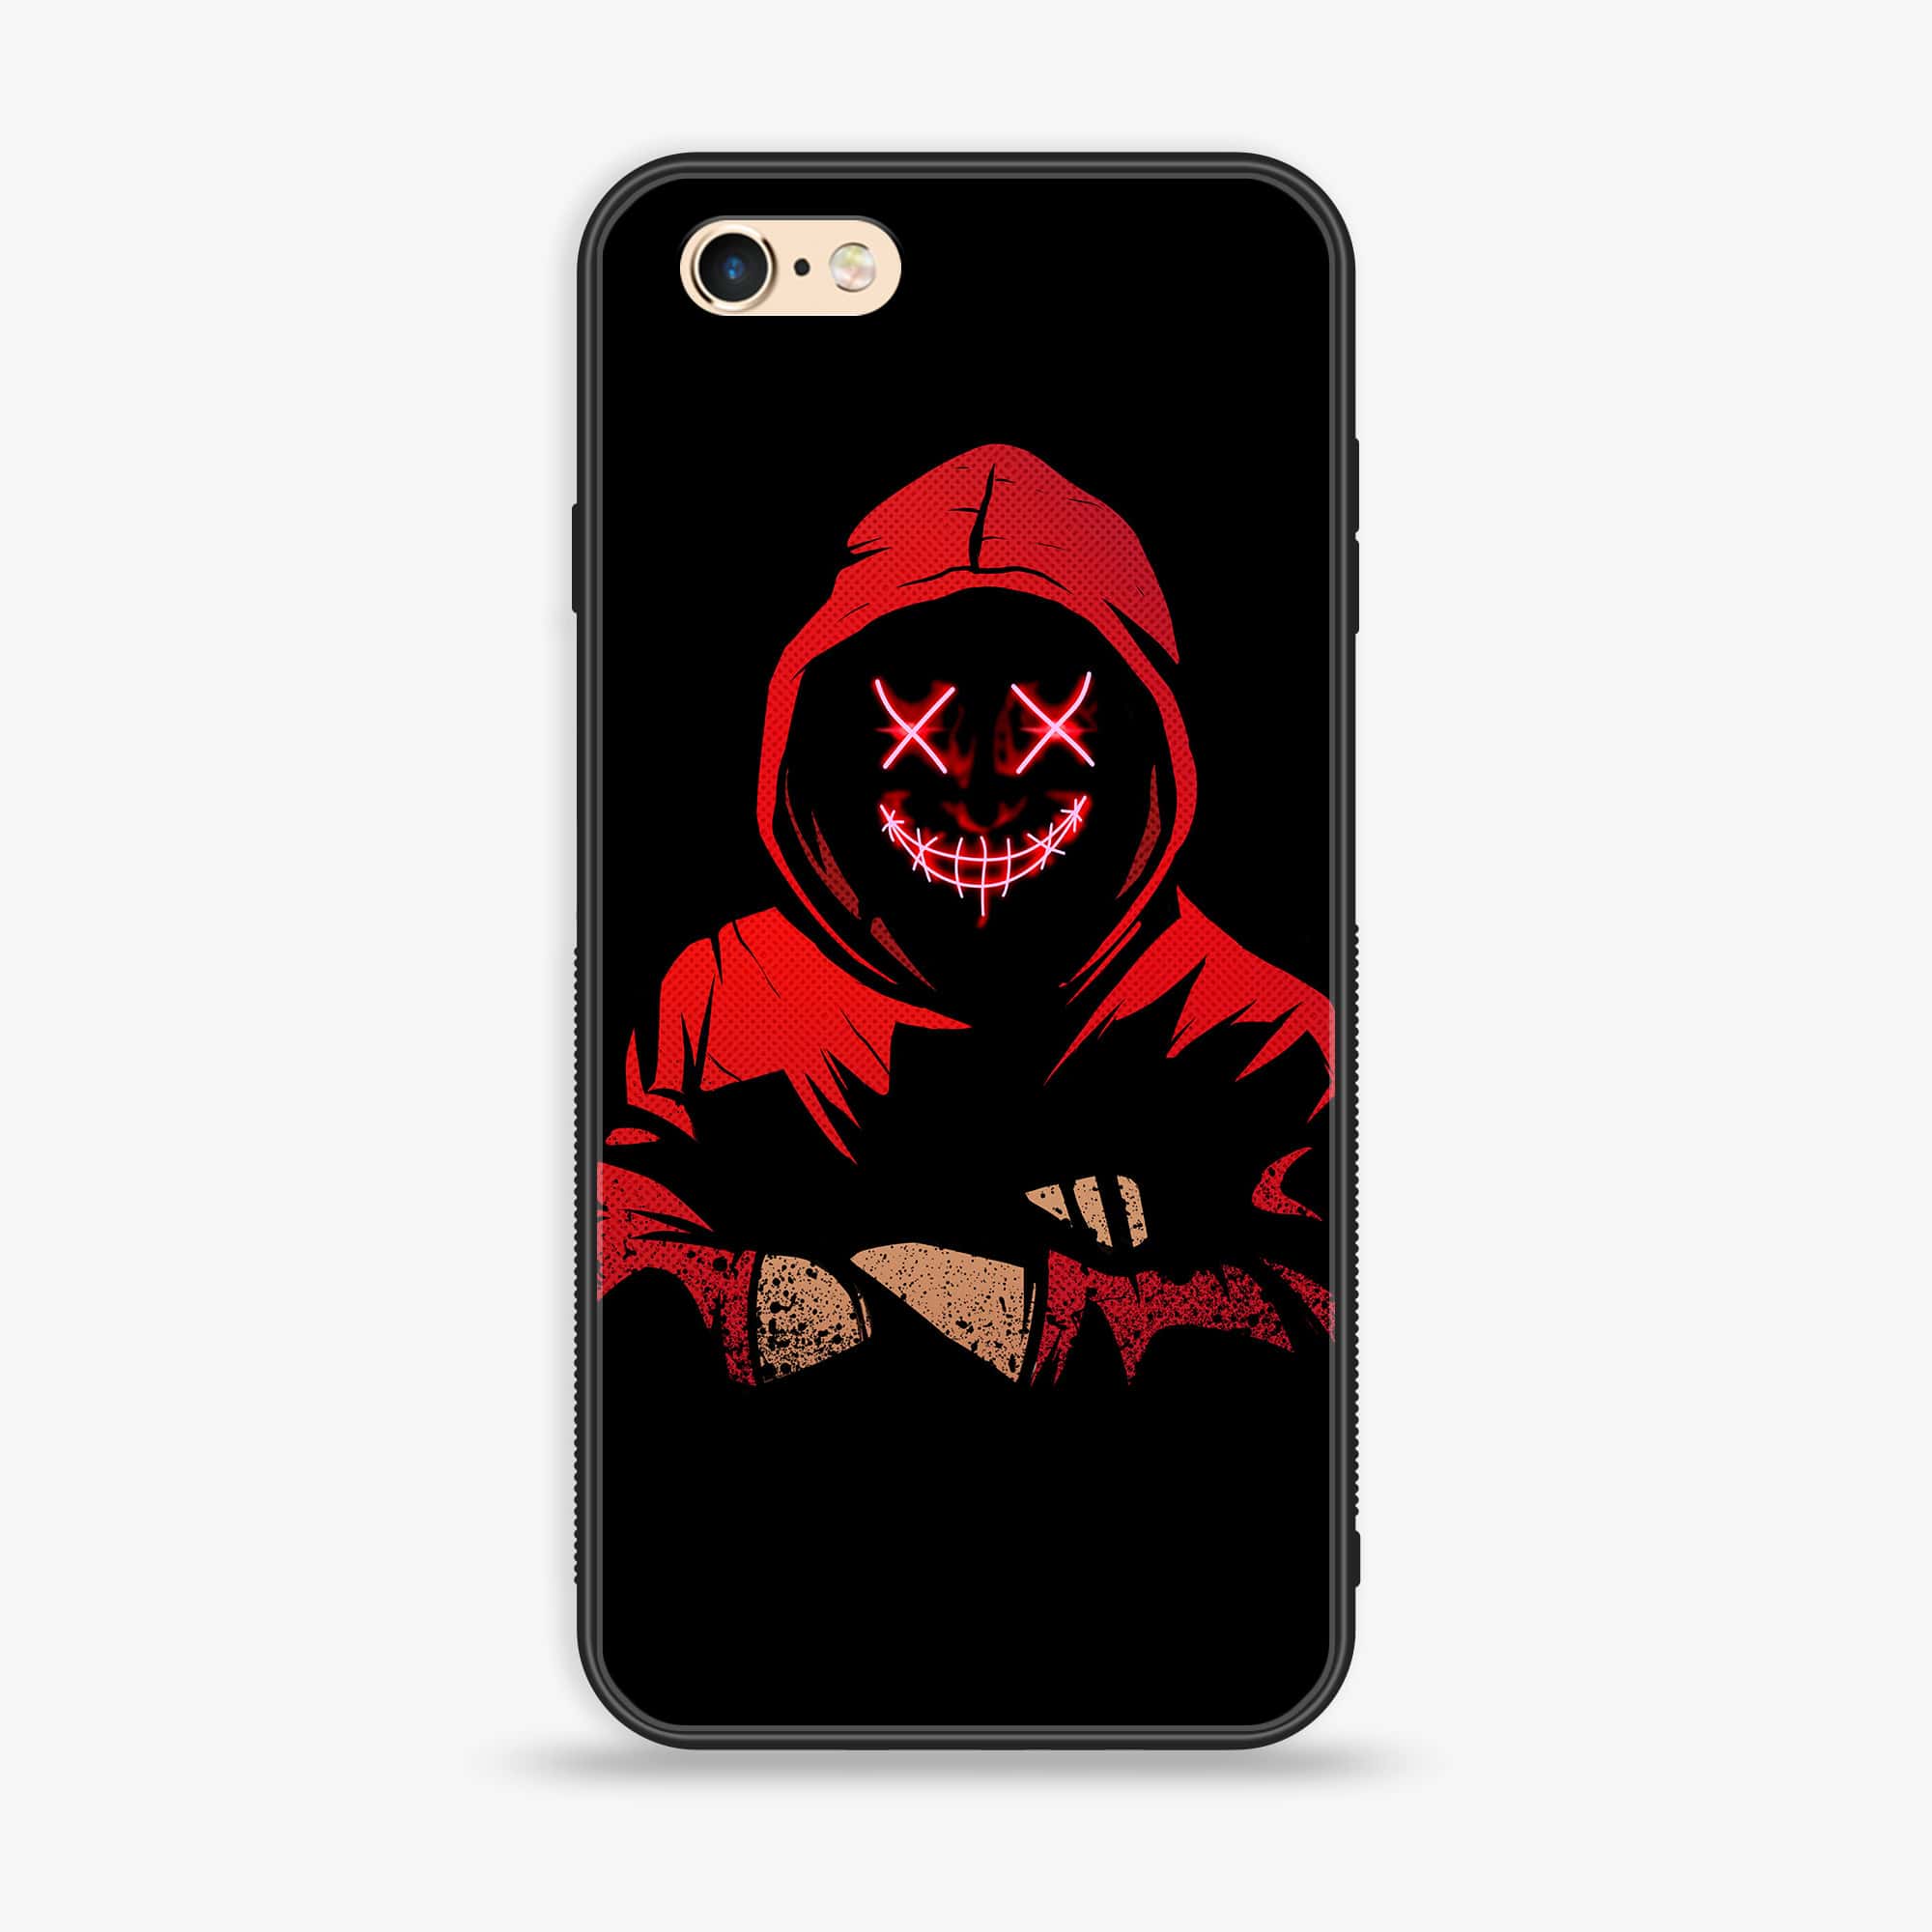 iPhone 6 - Anonymous 2.0 Series - Premium Printed Glass soft Bumper shock Proof Case